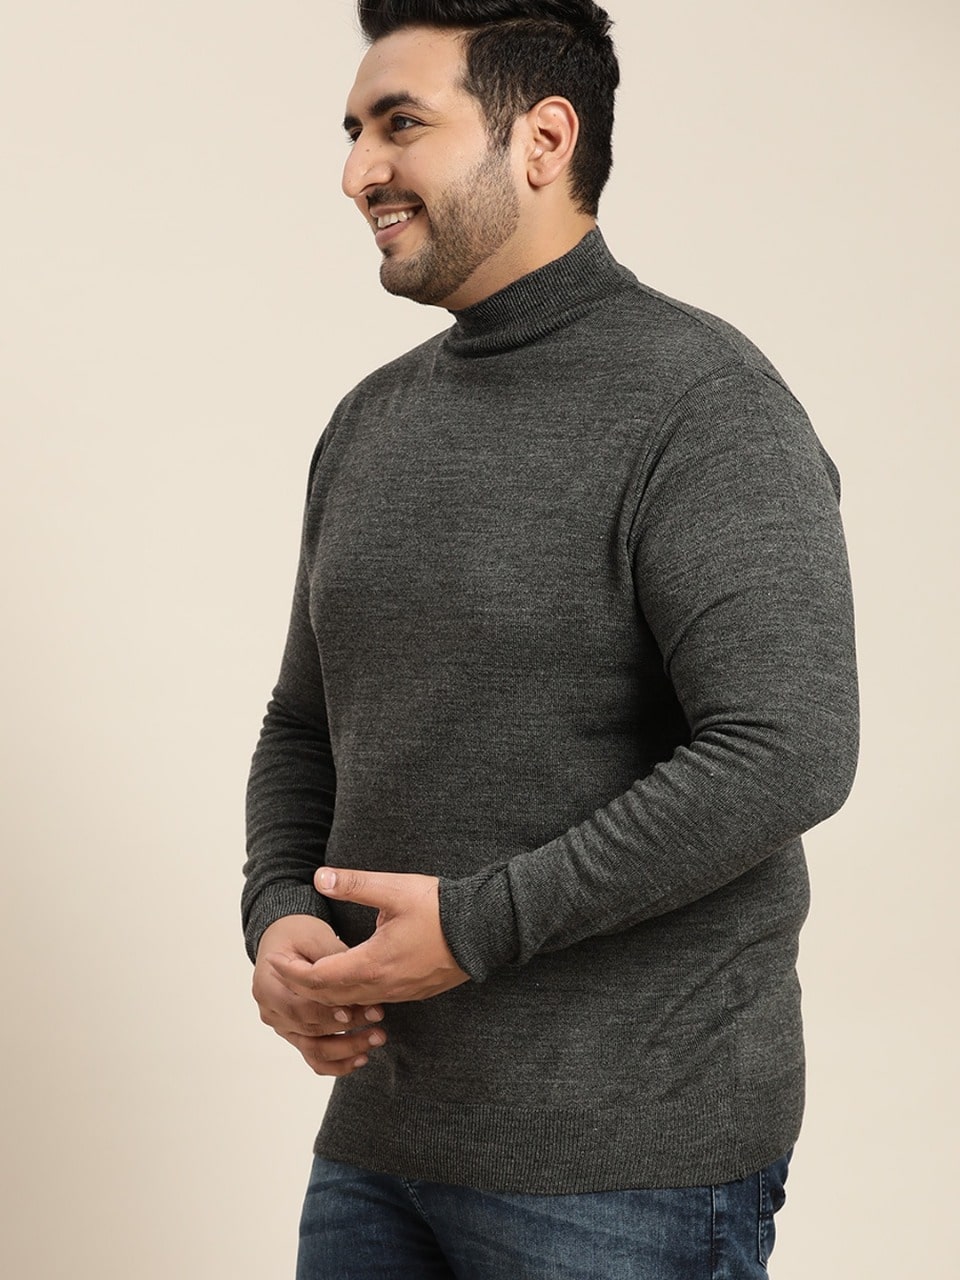 Men Plus Size Charcoal Grey Solid Pullover